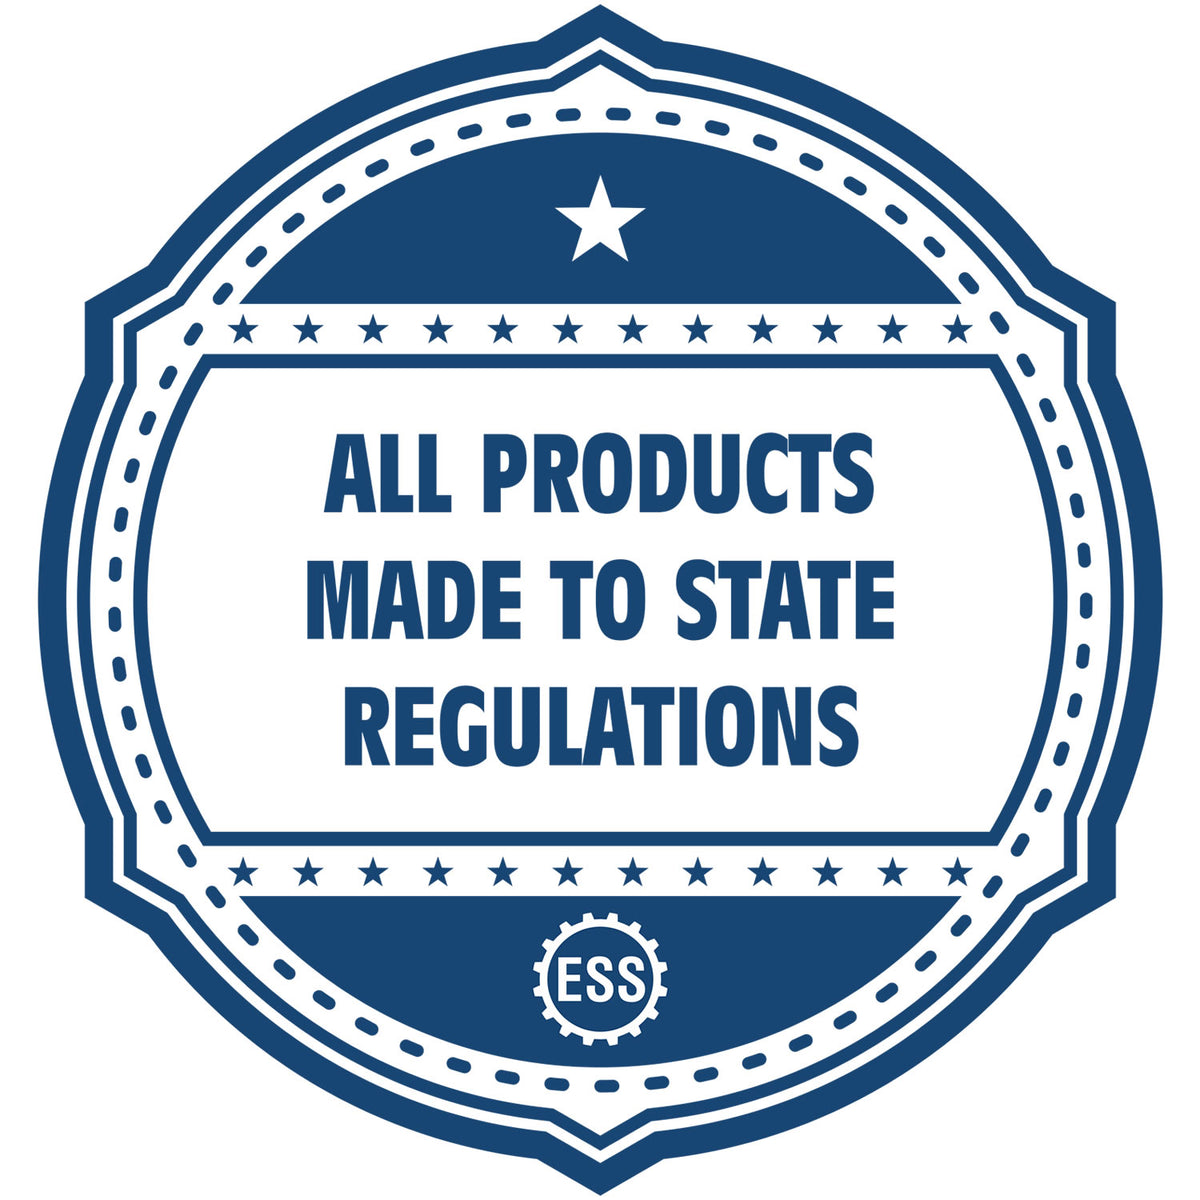 An icon or badge element for the Handheld Idaho Architect Seal Embosser showing that this product is made in compliance with state regulations.